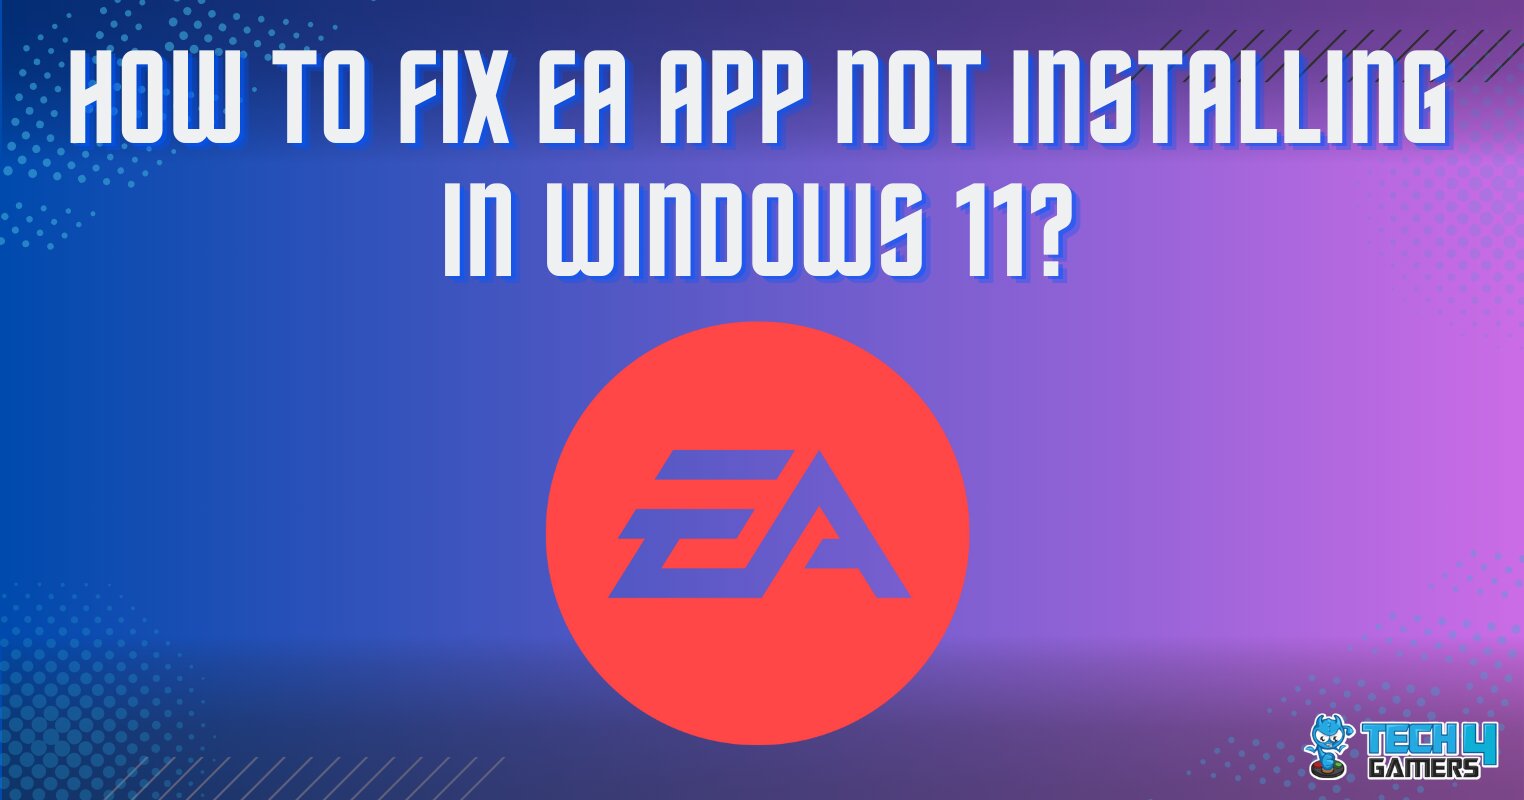 How To Fix EA App Not Installing Windows 11? Tech4Gamers